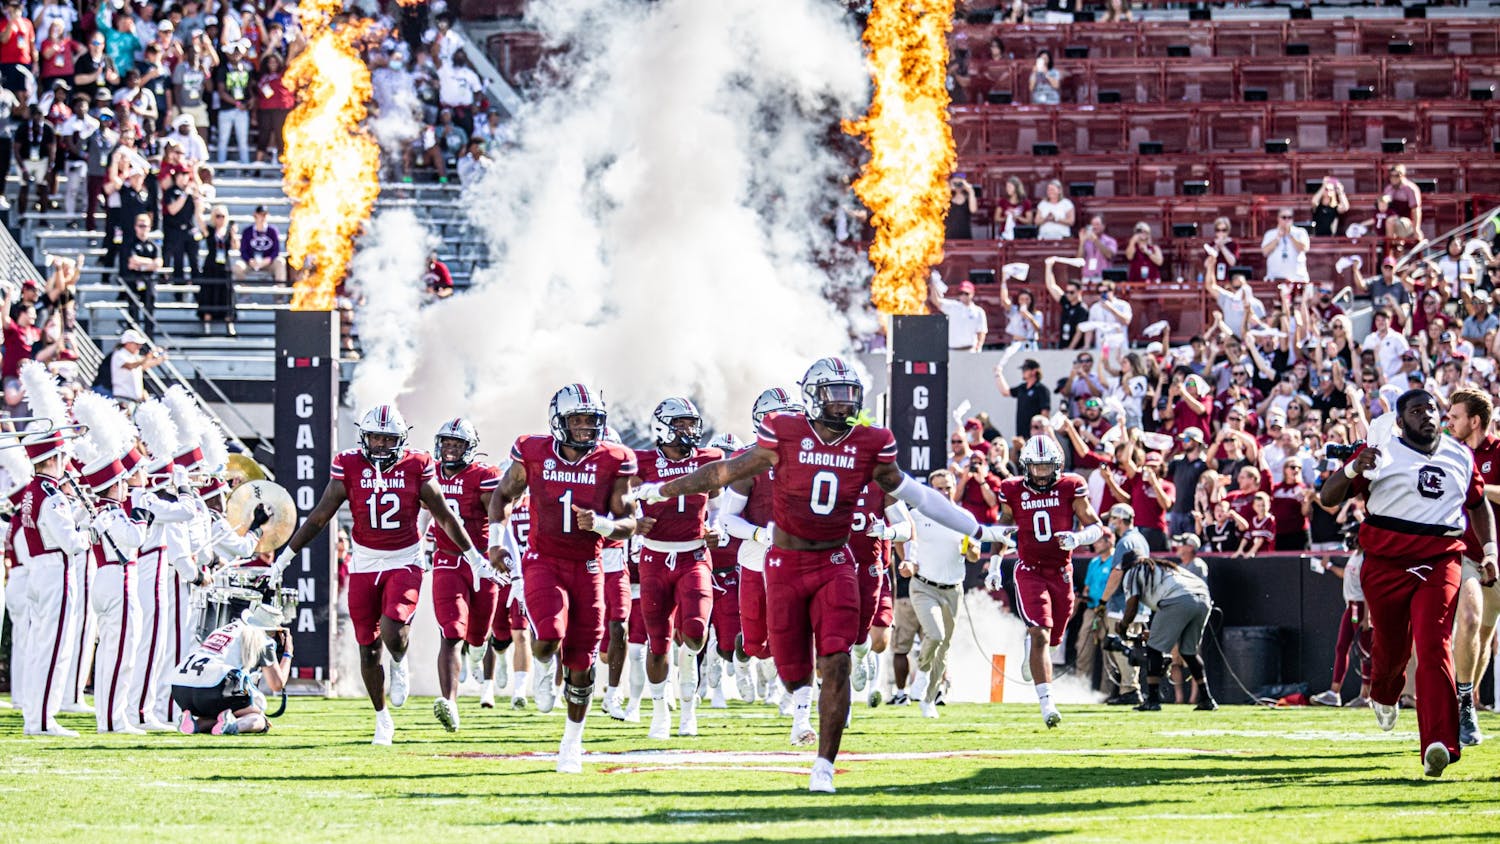 FILE—The Gamecocks rush the field before kick off against Troy on Saturday, Oct. 2, 2021. South Carolina won the game 23-14.